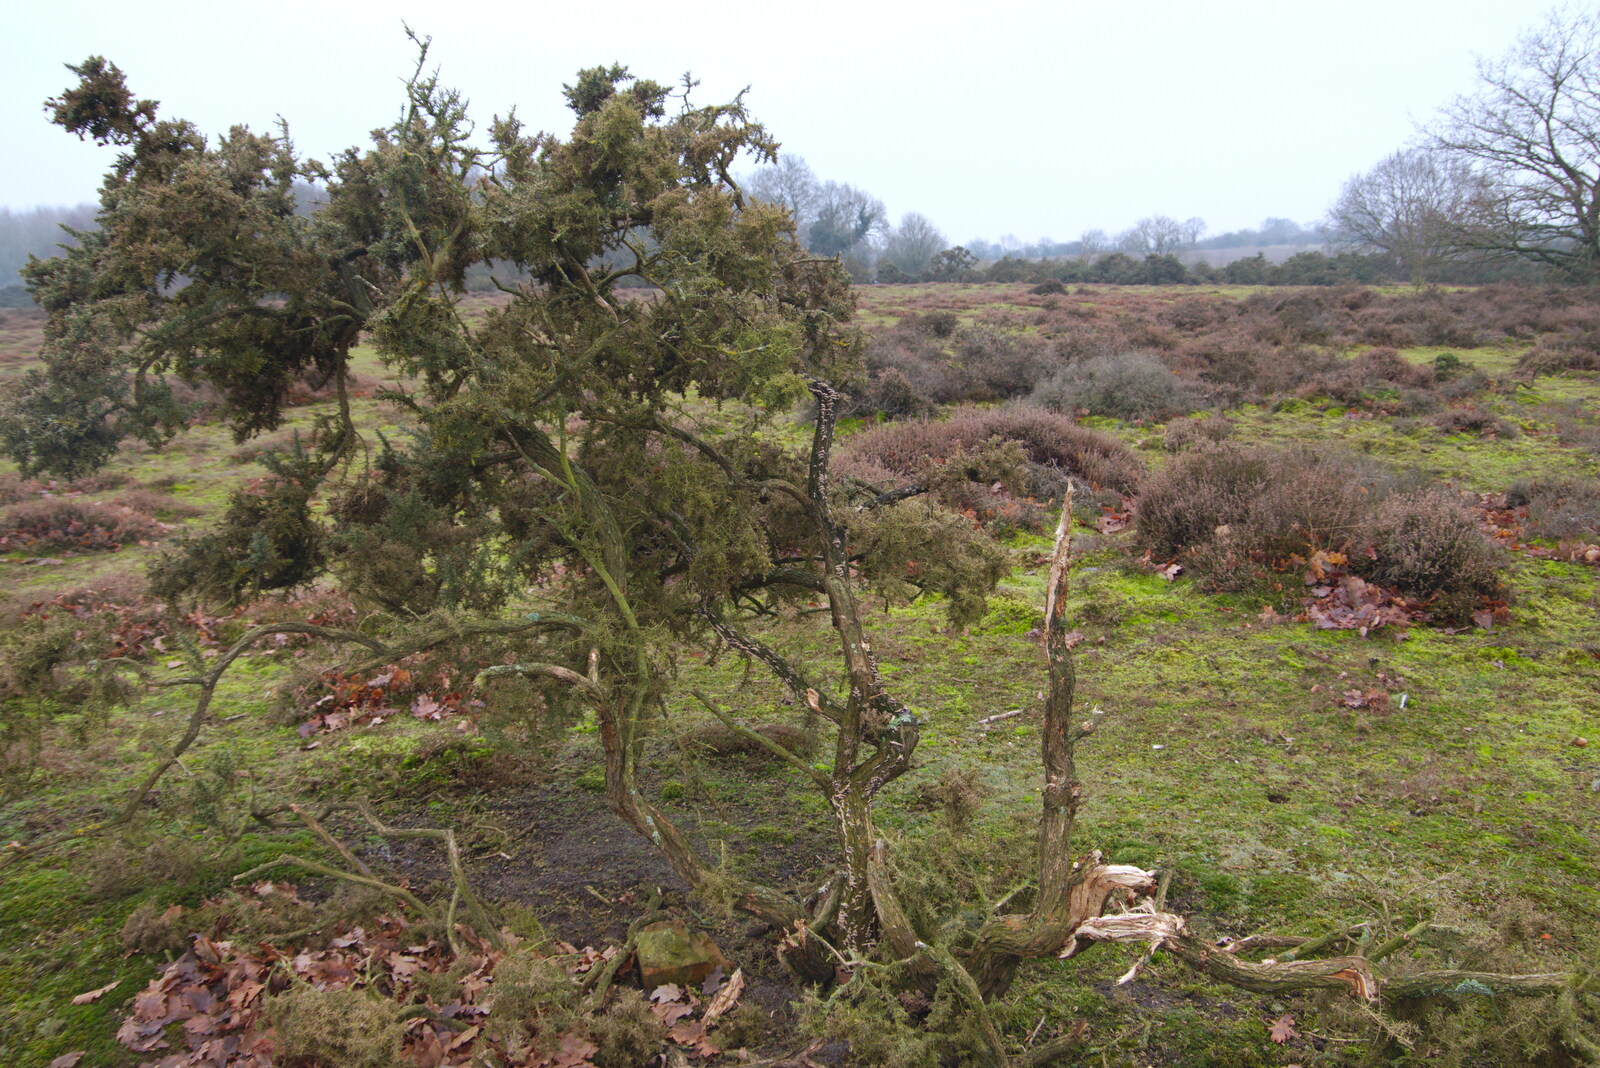 A ravaged gorse bush from New Year's Day on the Ling, Wortham, Suffolk - 1st January 2020